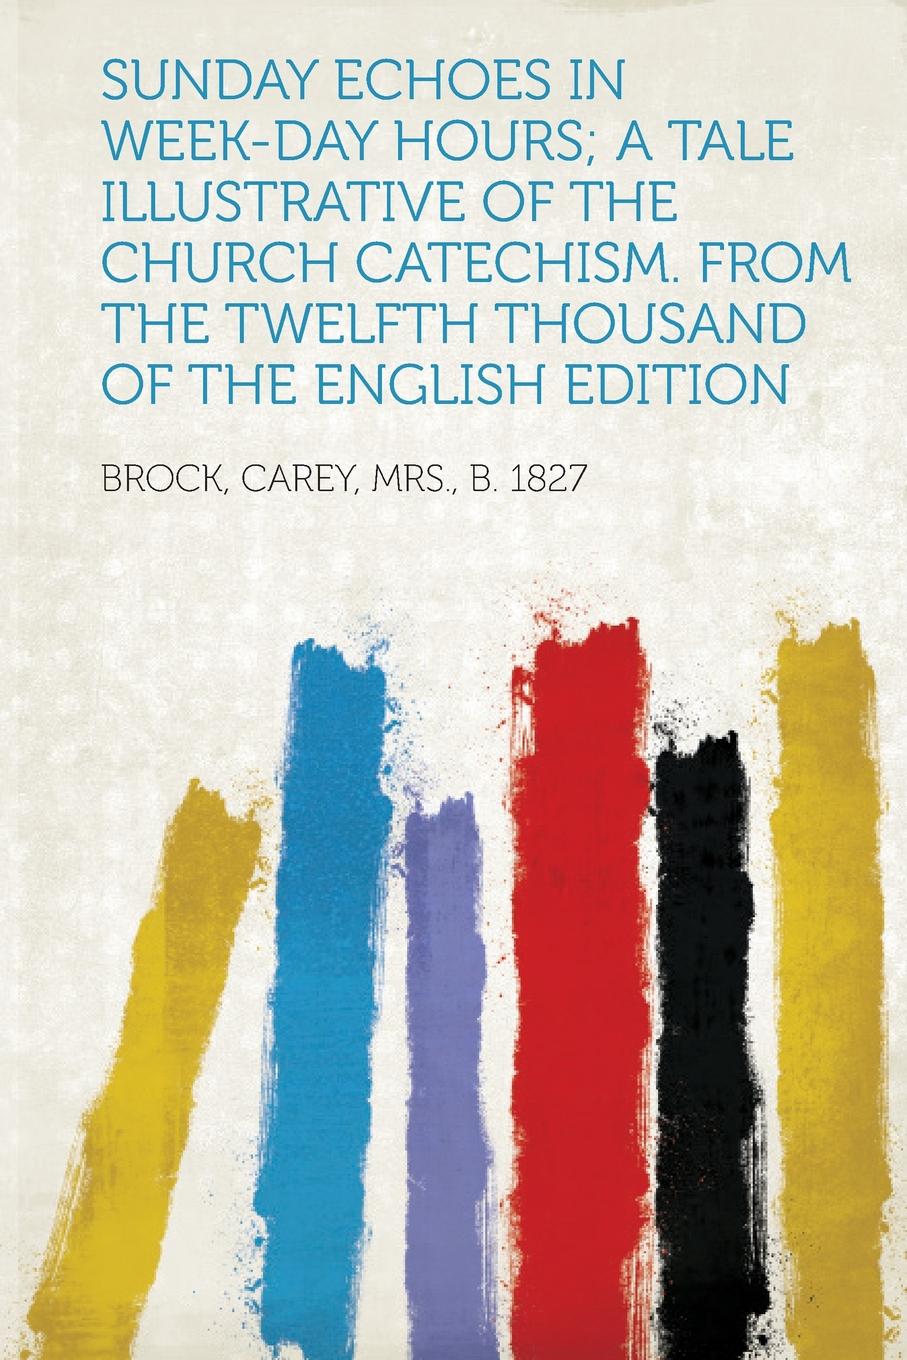 Sunday Echoes in Week-Day Hours; A Tale Illustrative of the Church Catechism. from the Twelfth Thousand of the English Edition